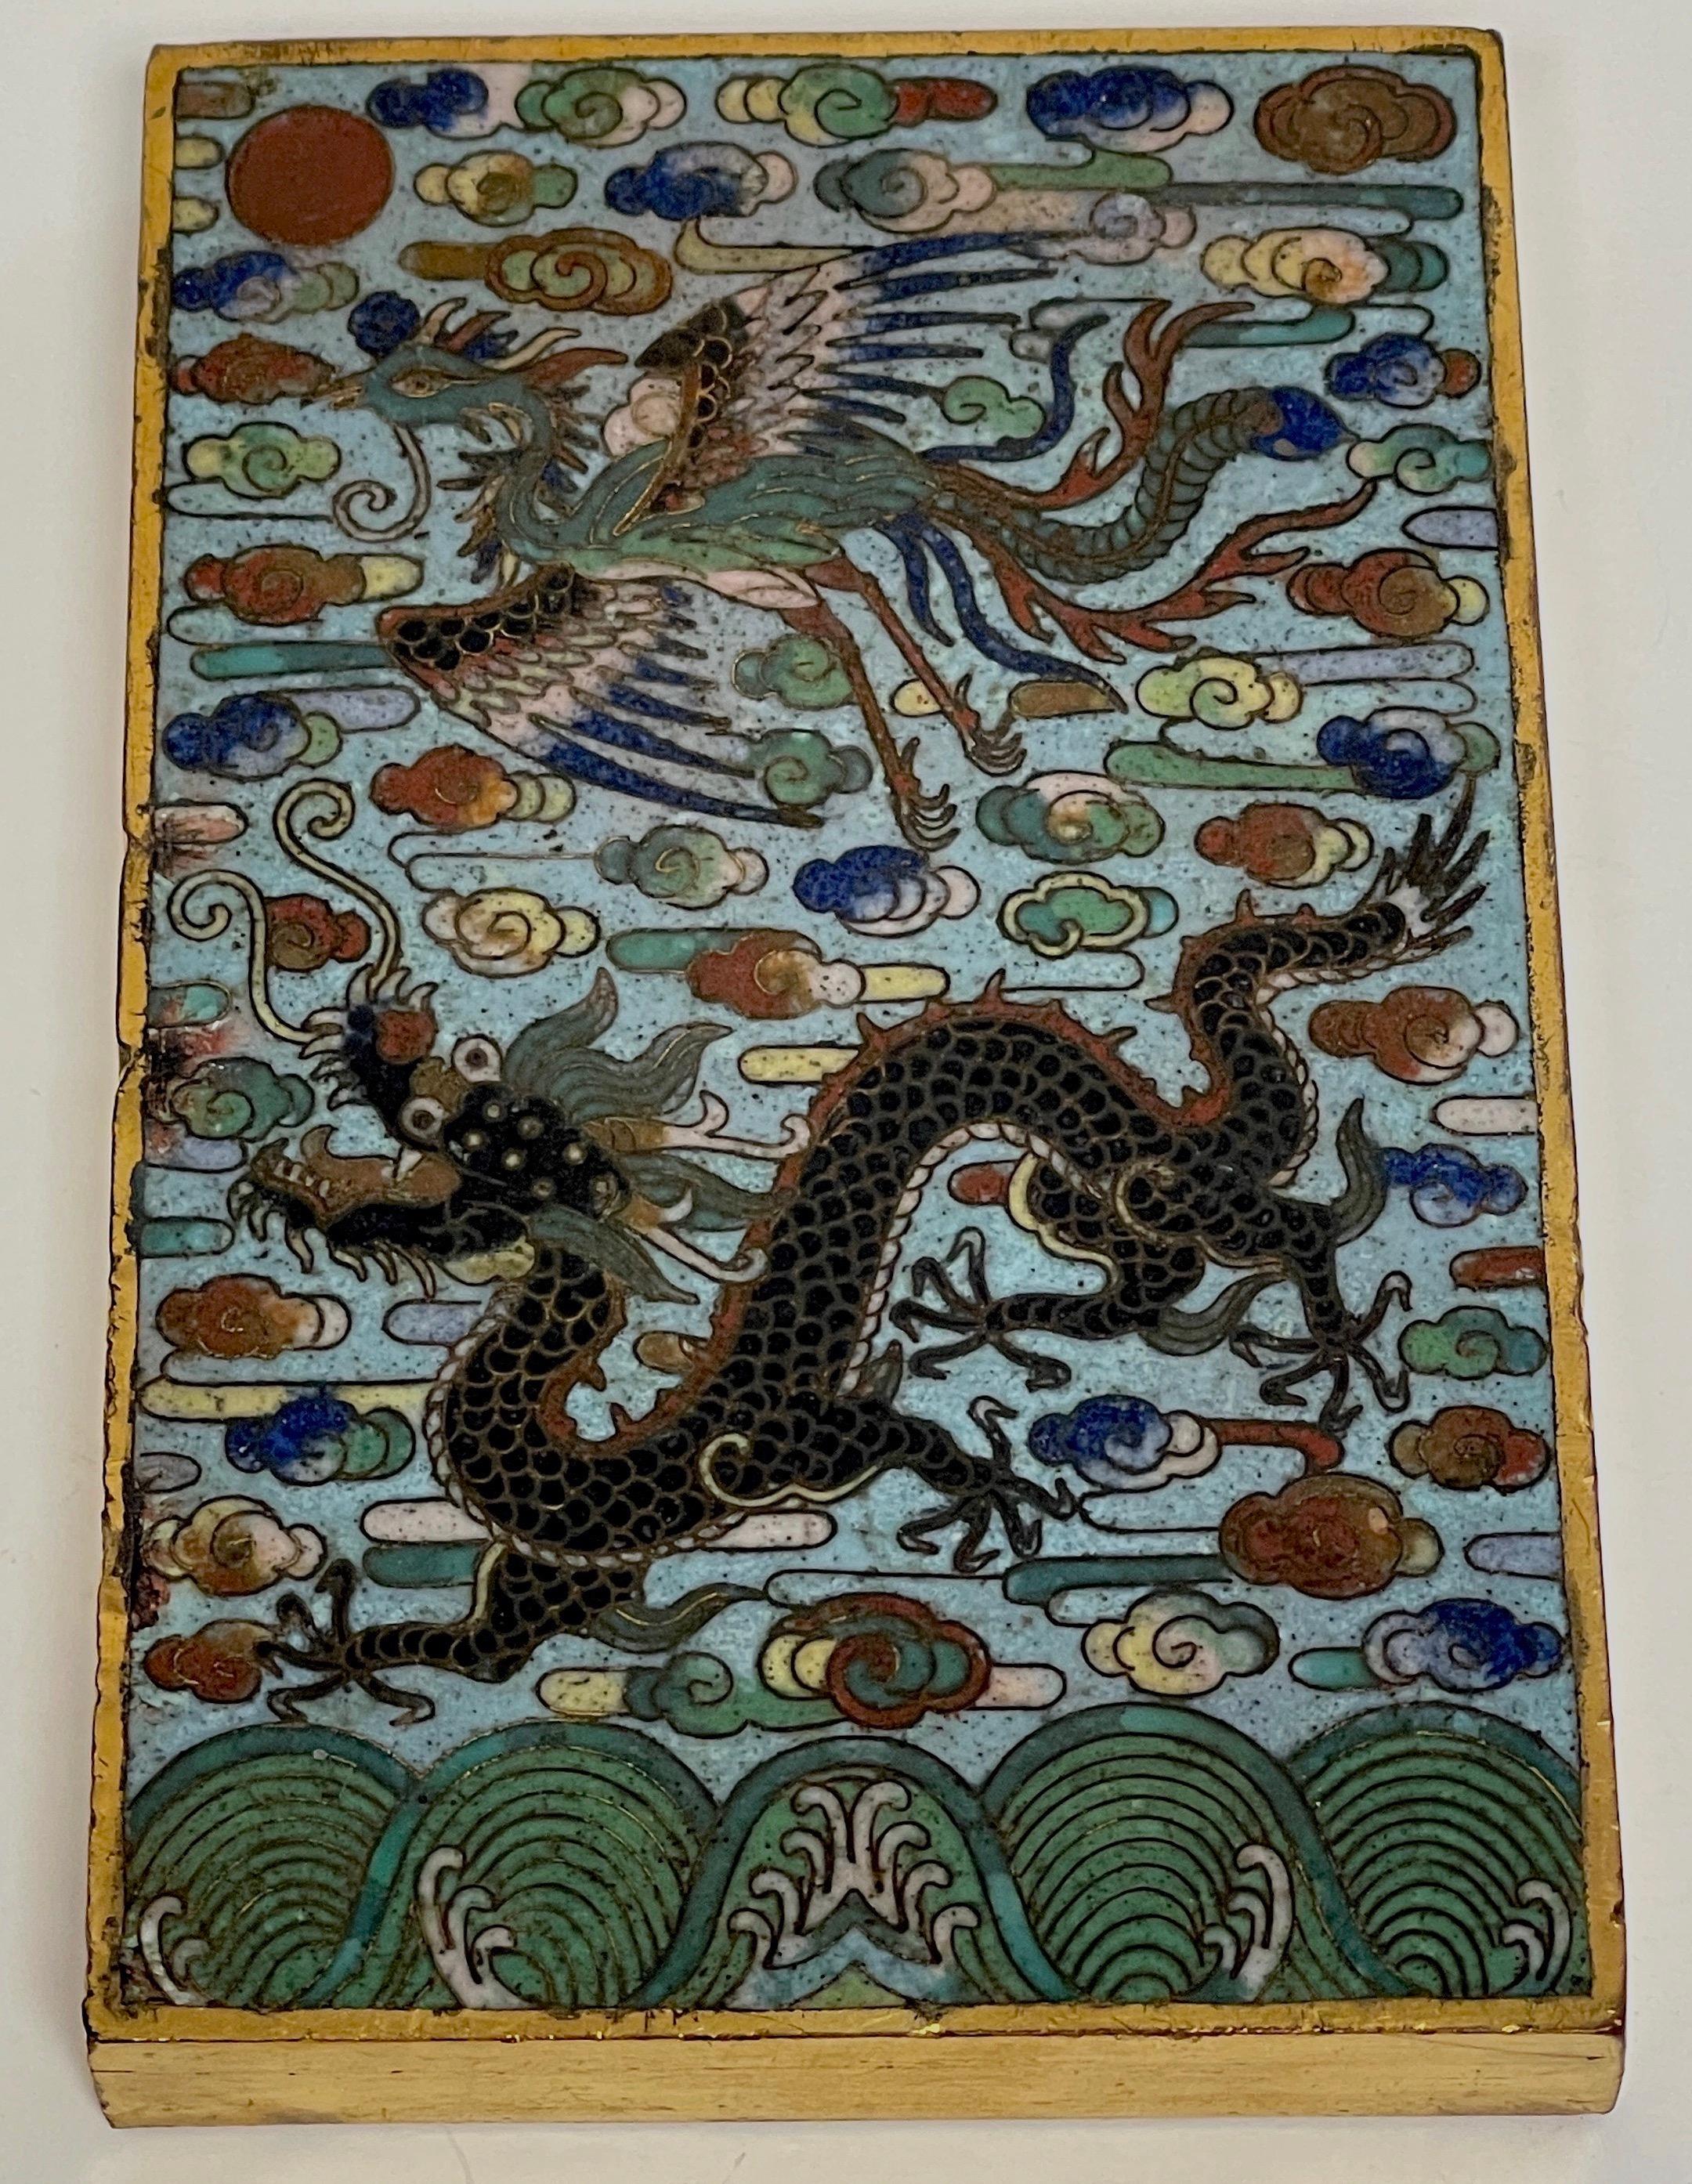 Chinese Qing Period gold plated bronze Cloisonné dragon & phoenix paperweight 
Qing Period, 19th century or older
Exceptional cloisonné work depicting the dragon and phoenix, representing emblems of emperor and empress. This is a very dense and